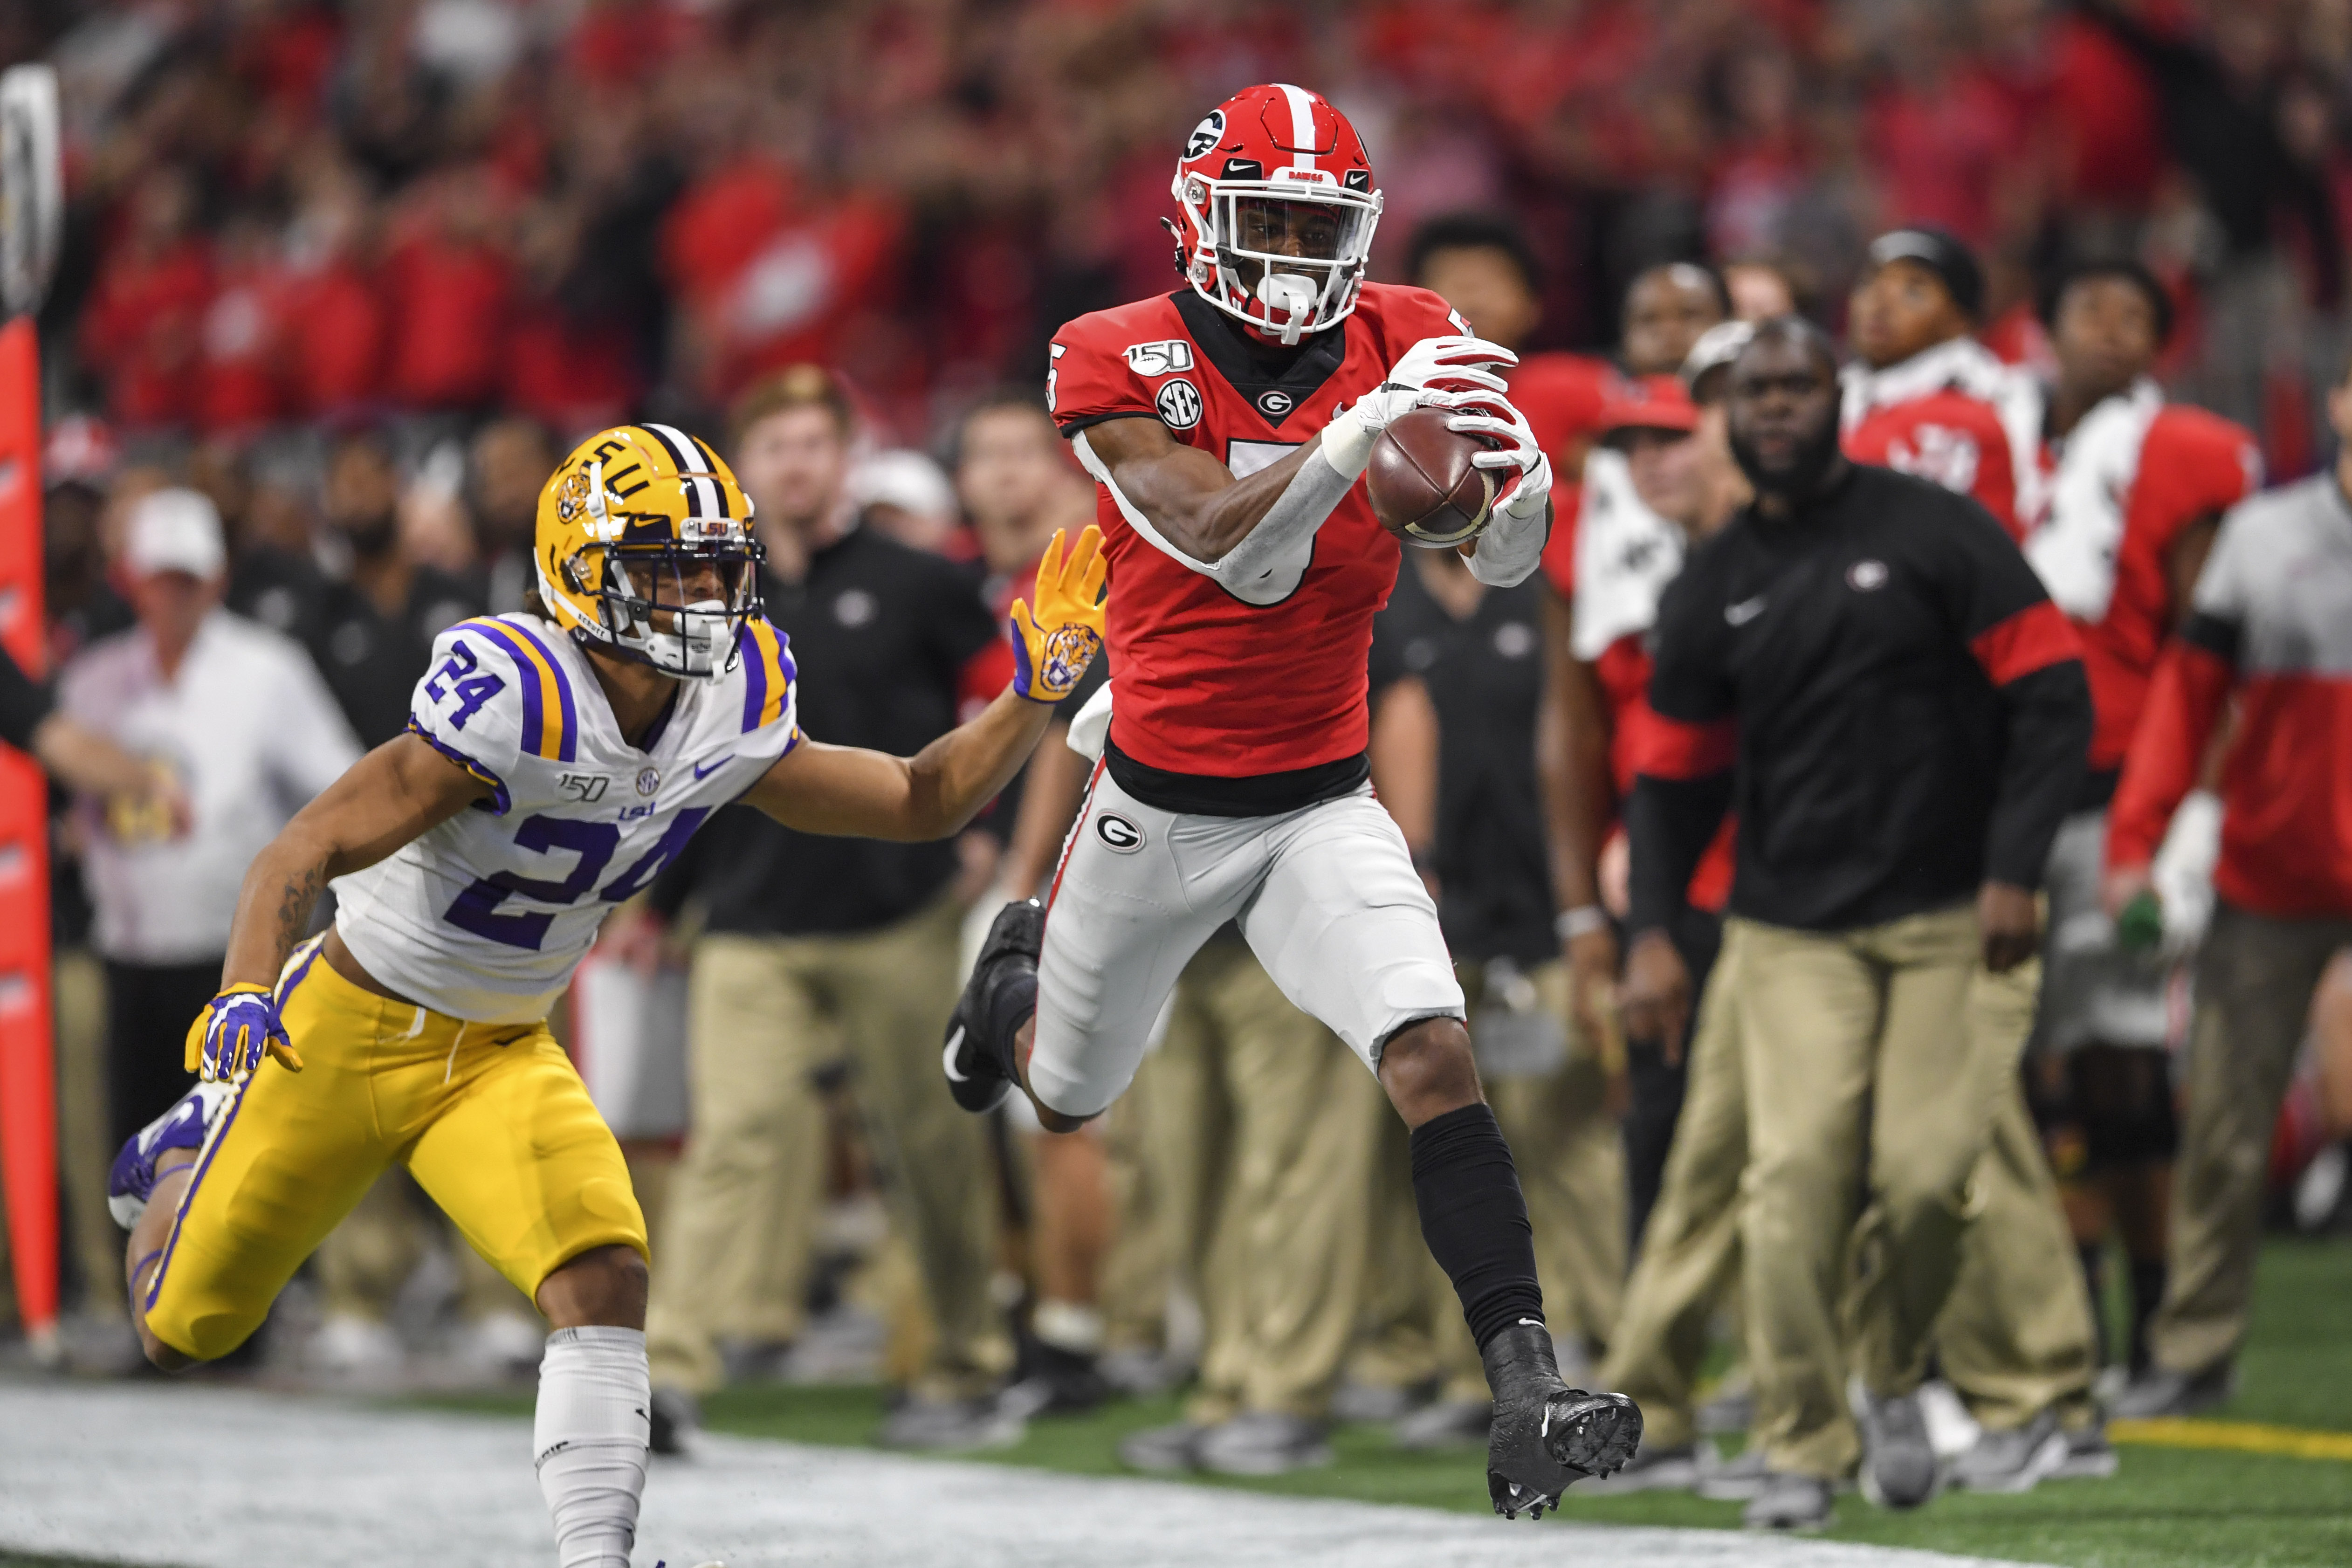 Reports: Georgia's Dominick Blaylock suffers retorn ACL, out for